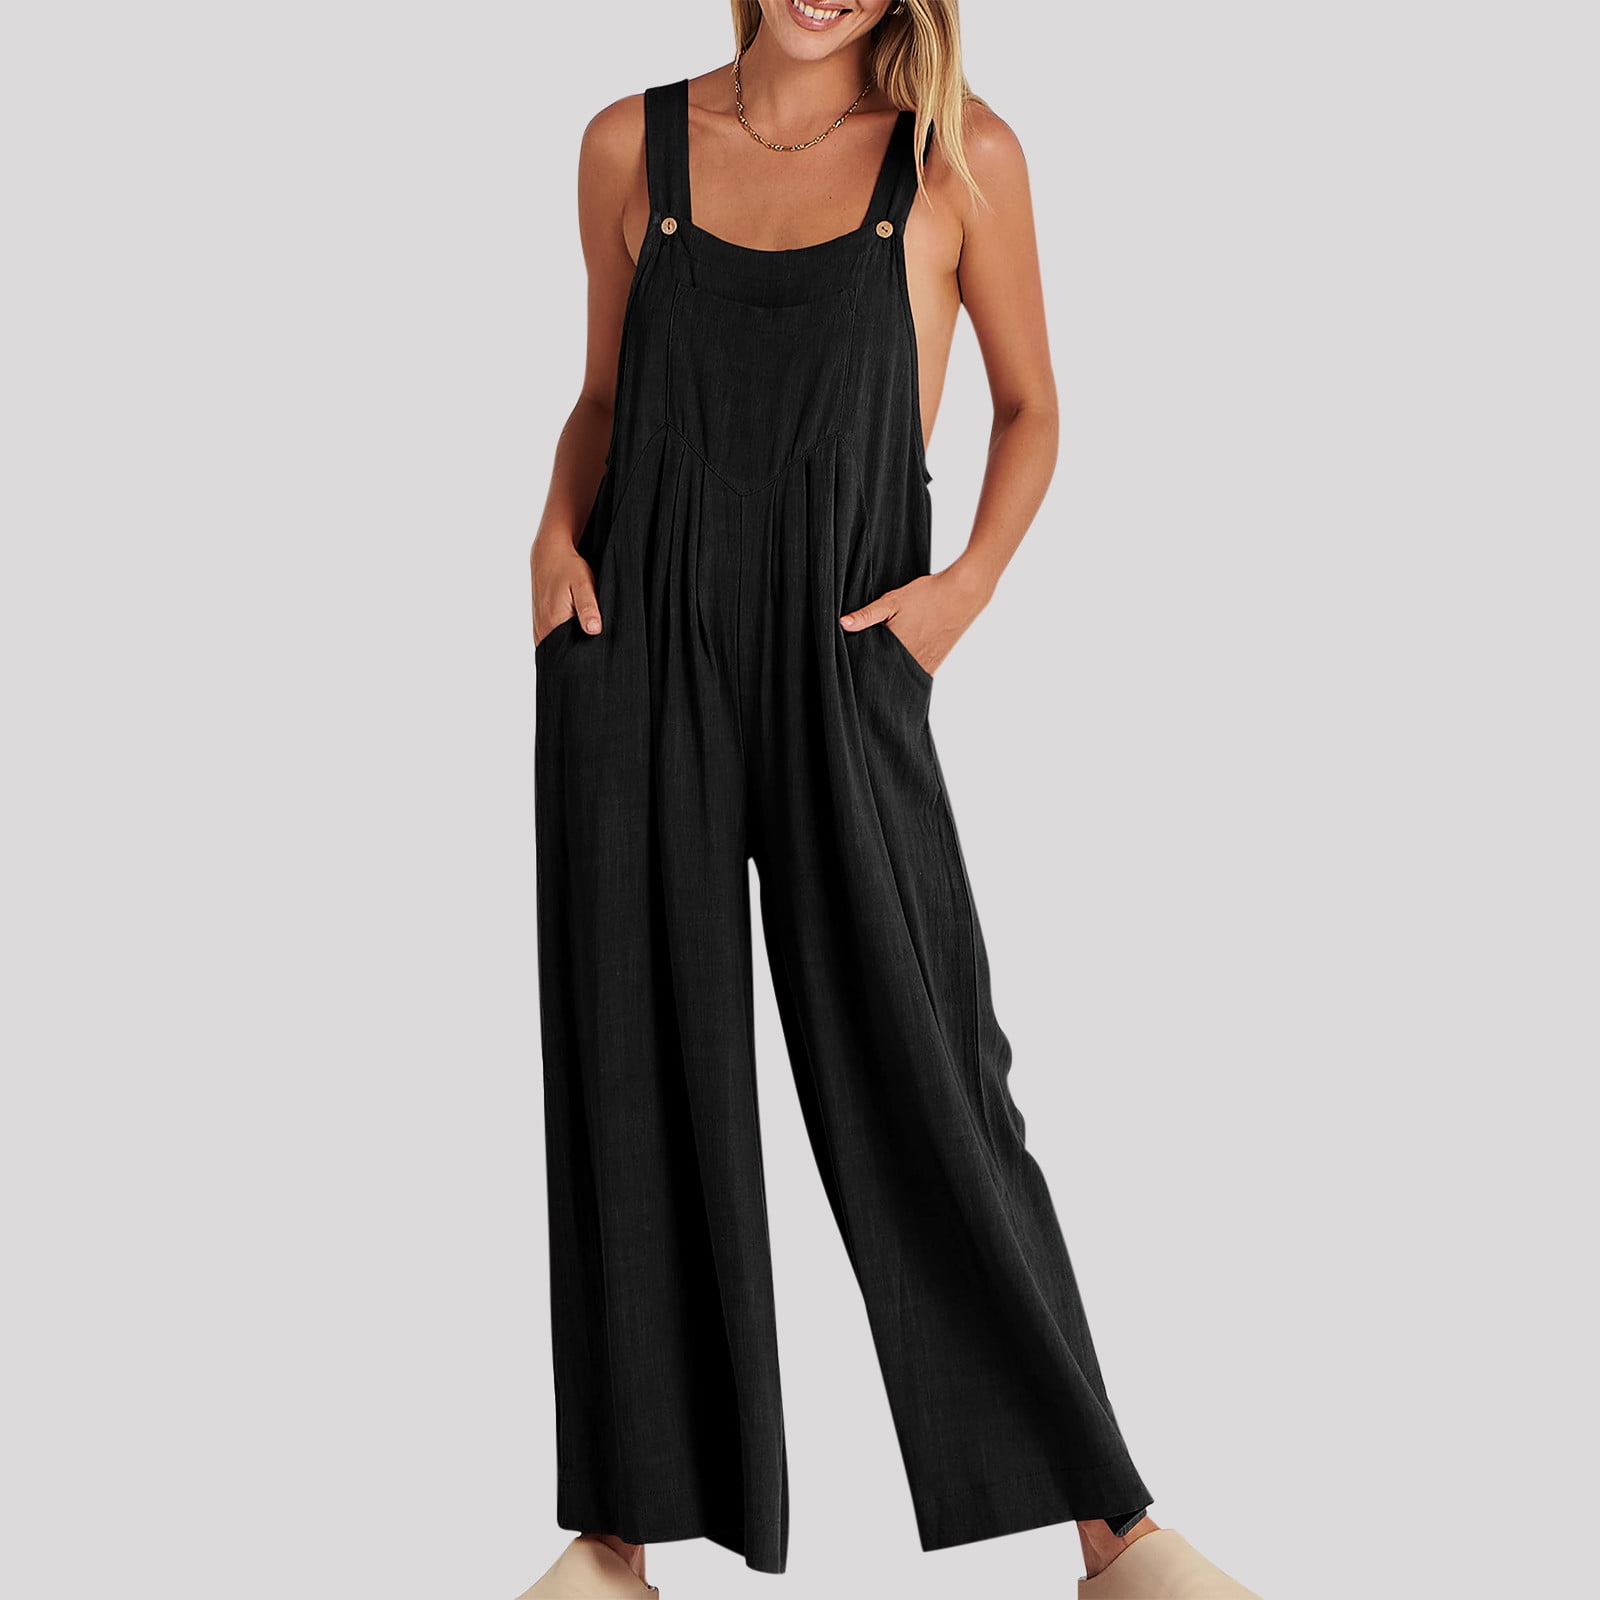  YADMISU Women's Casual Baggy Cropped Jumpsuit Overalls Sling  Backless Solid Color Cotton Rompers Straight Wide Leg Pants with Pockets  (Black, Small) : Clothing, Shoes & Jewelry